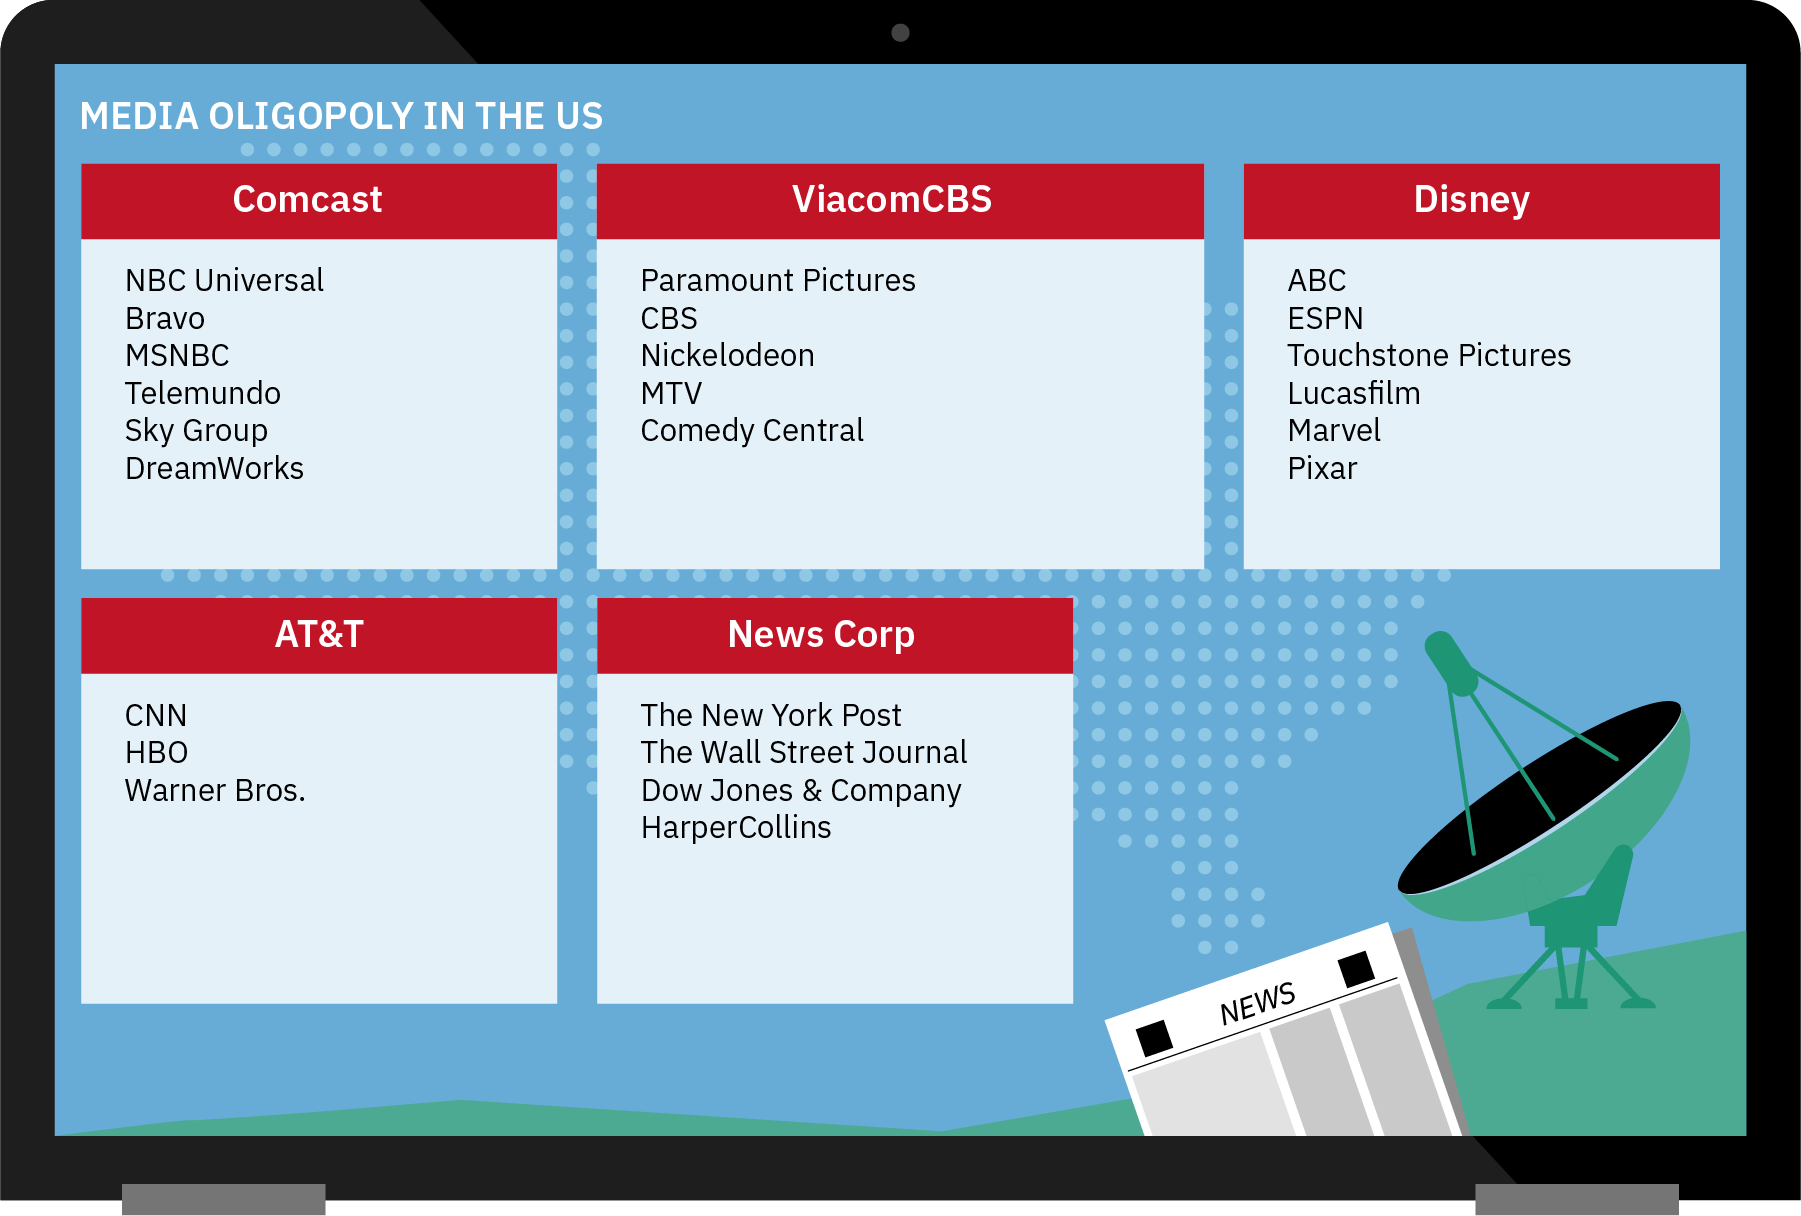 Infographic of the media oligopoly in the US shows that five large corporations--Comcast, ViacomCBS, Disney, AT&T, and News Corp--own numerous major news and media outlets like HBO, Telemundo, Paramount Pictures, Lucasfilm, CNN, Warner Bros, and the Wall Street Journal, as well as the Big Three television networks (ABC, CBS, and NBC). Together these five corporations control about 90% of the US media market.